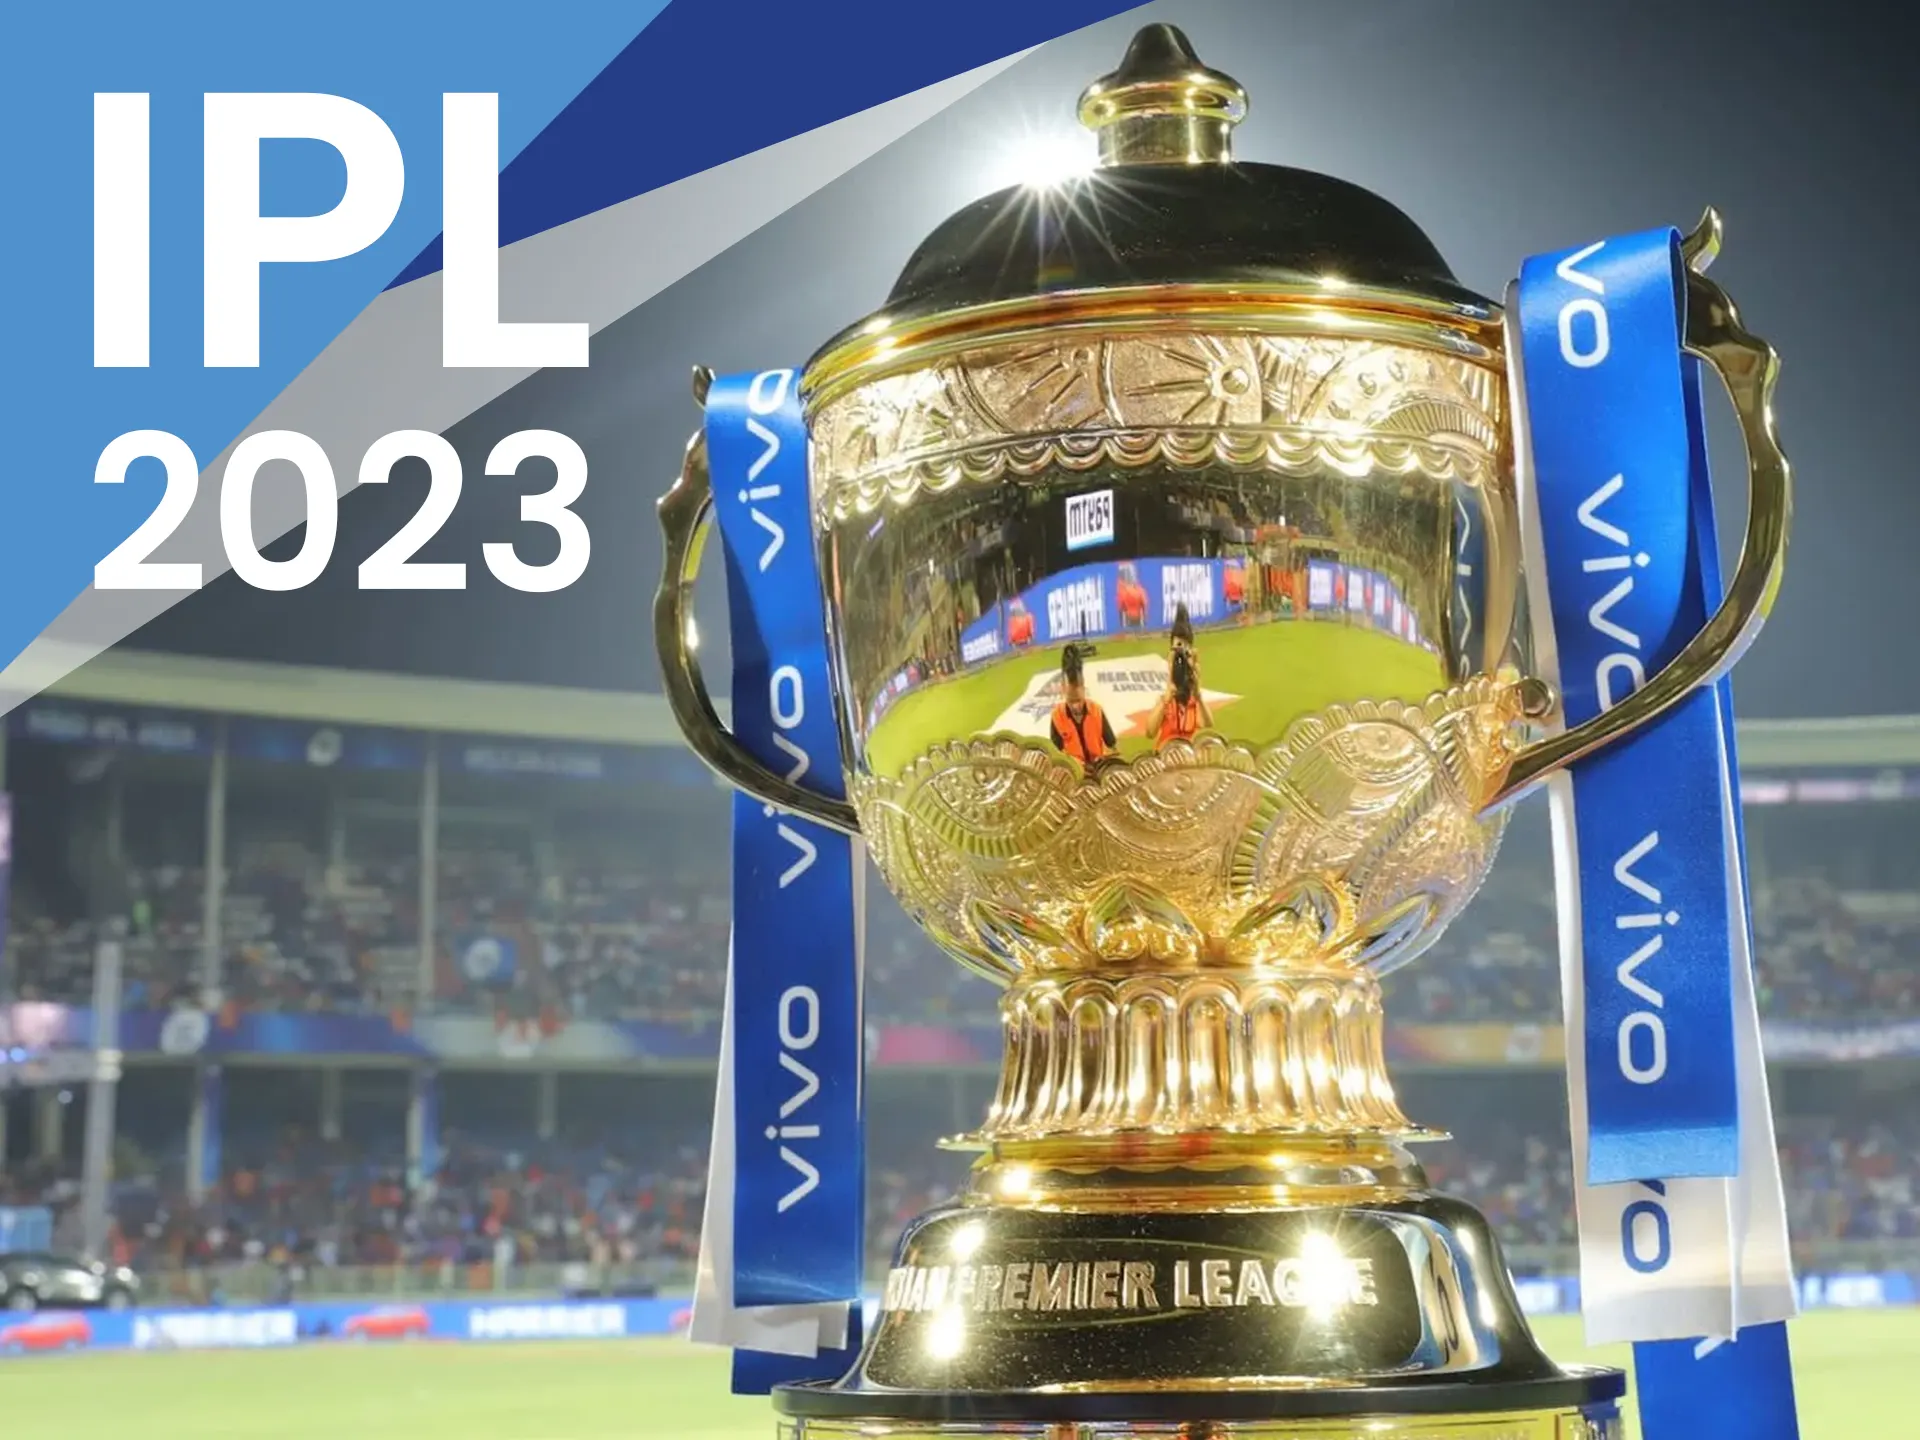 IPL is a main event in cricket world.